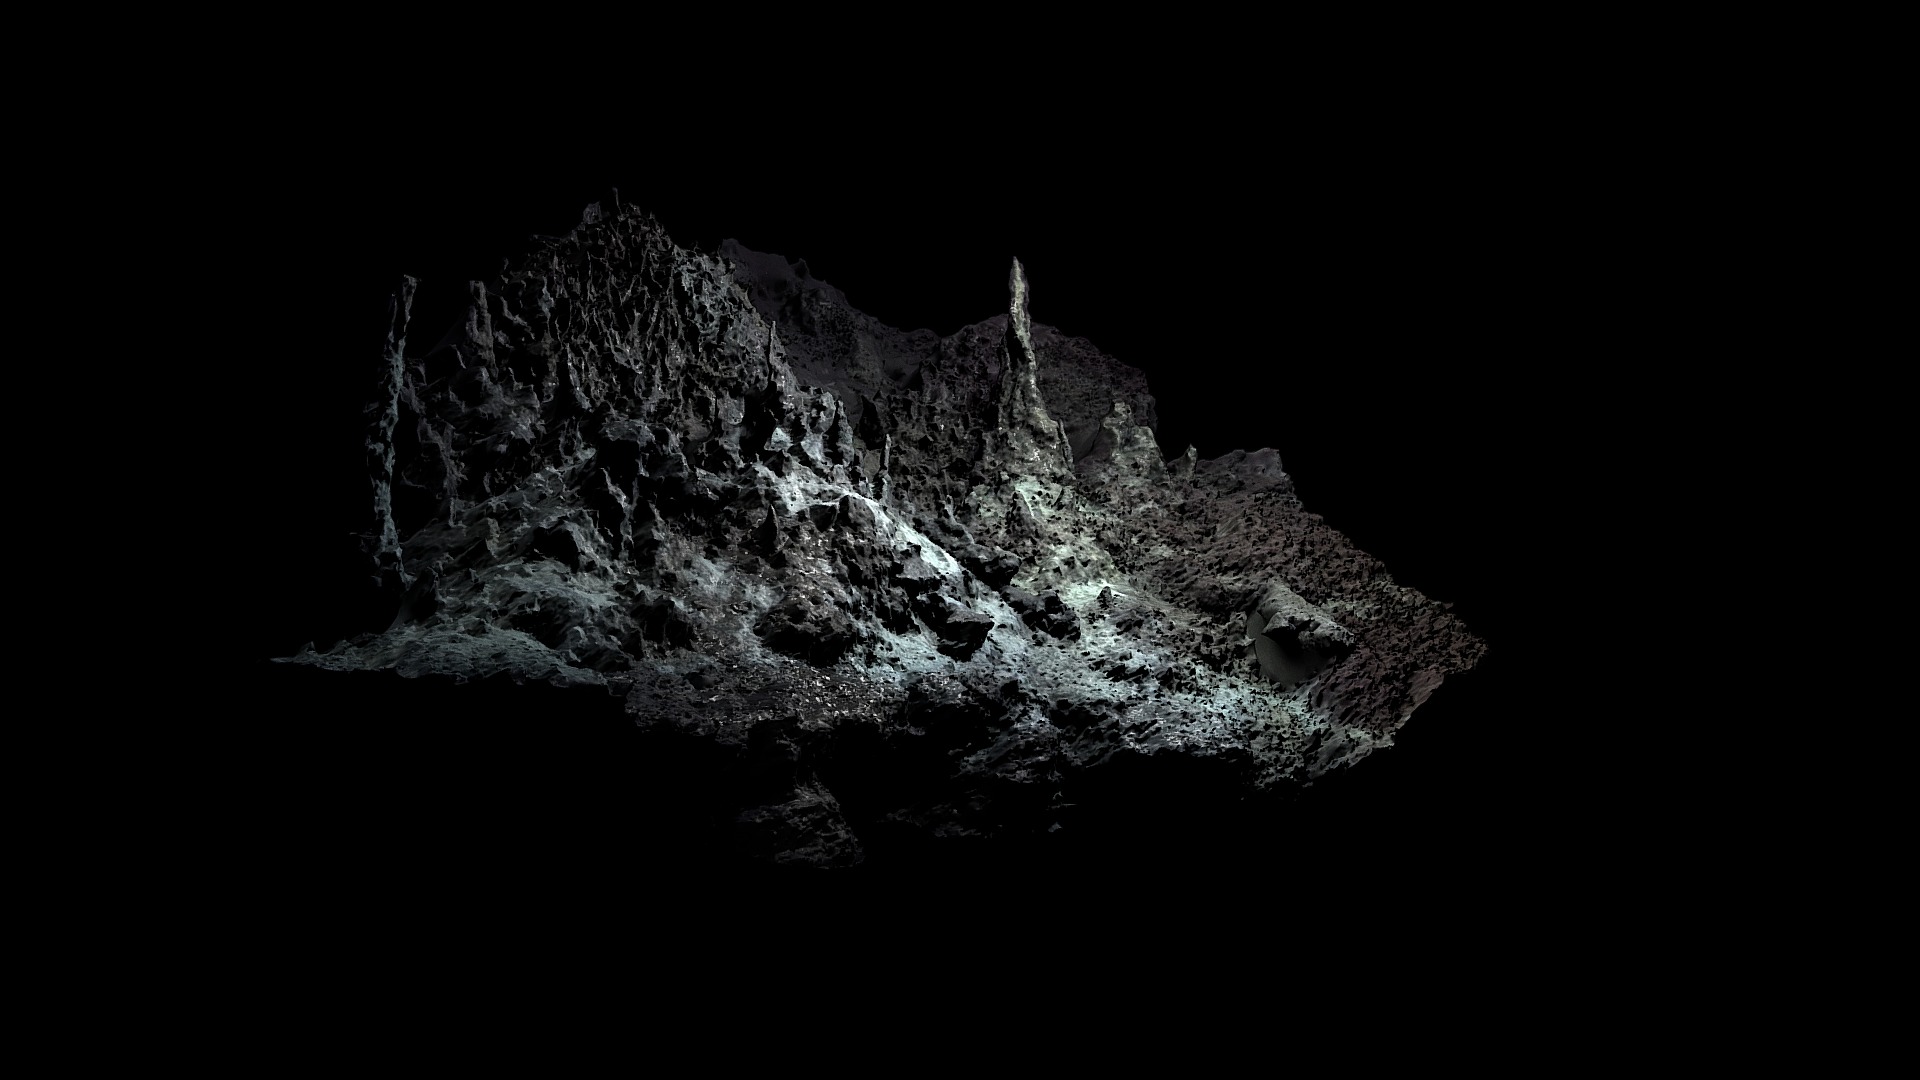 3D model Low Poly Deep Sea Hydrothermal Vent #5 - This is a 3D model of the Low Poly Deep Sea Hydrothermal Vent #5. The 3D model is about a rock with a dark background.